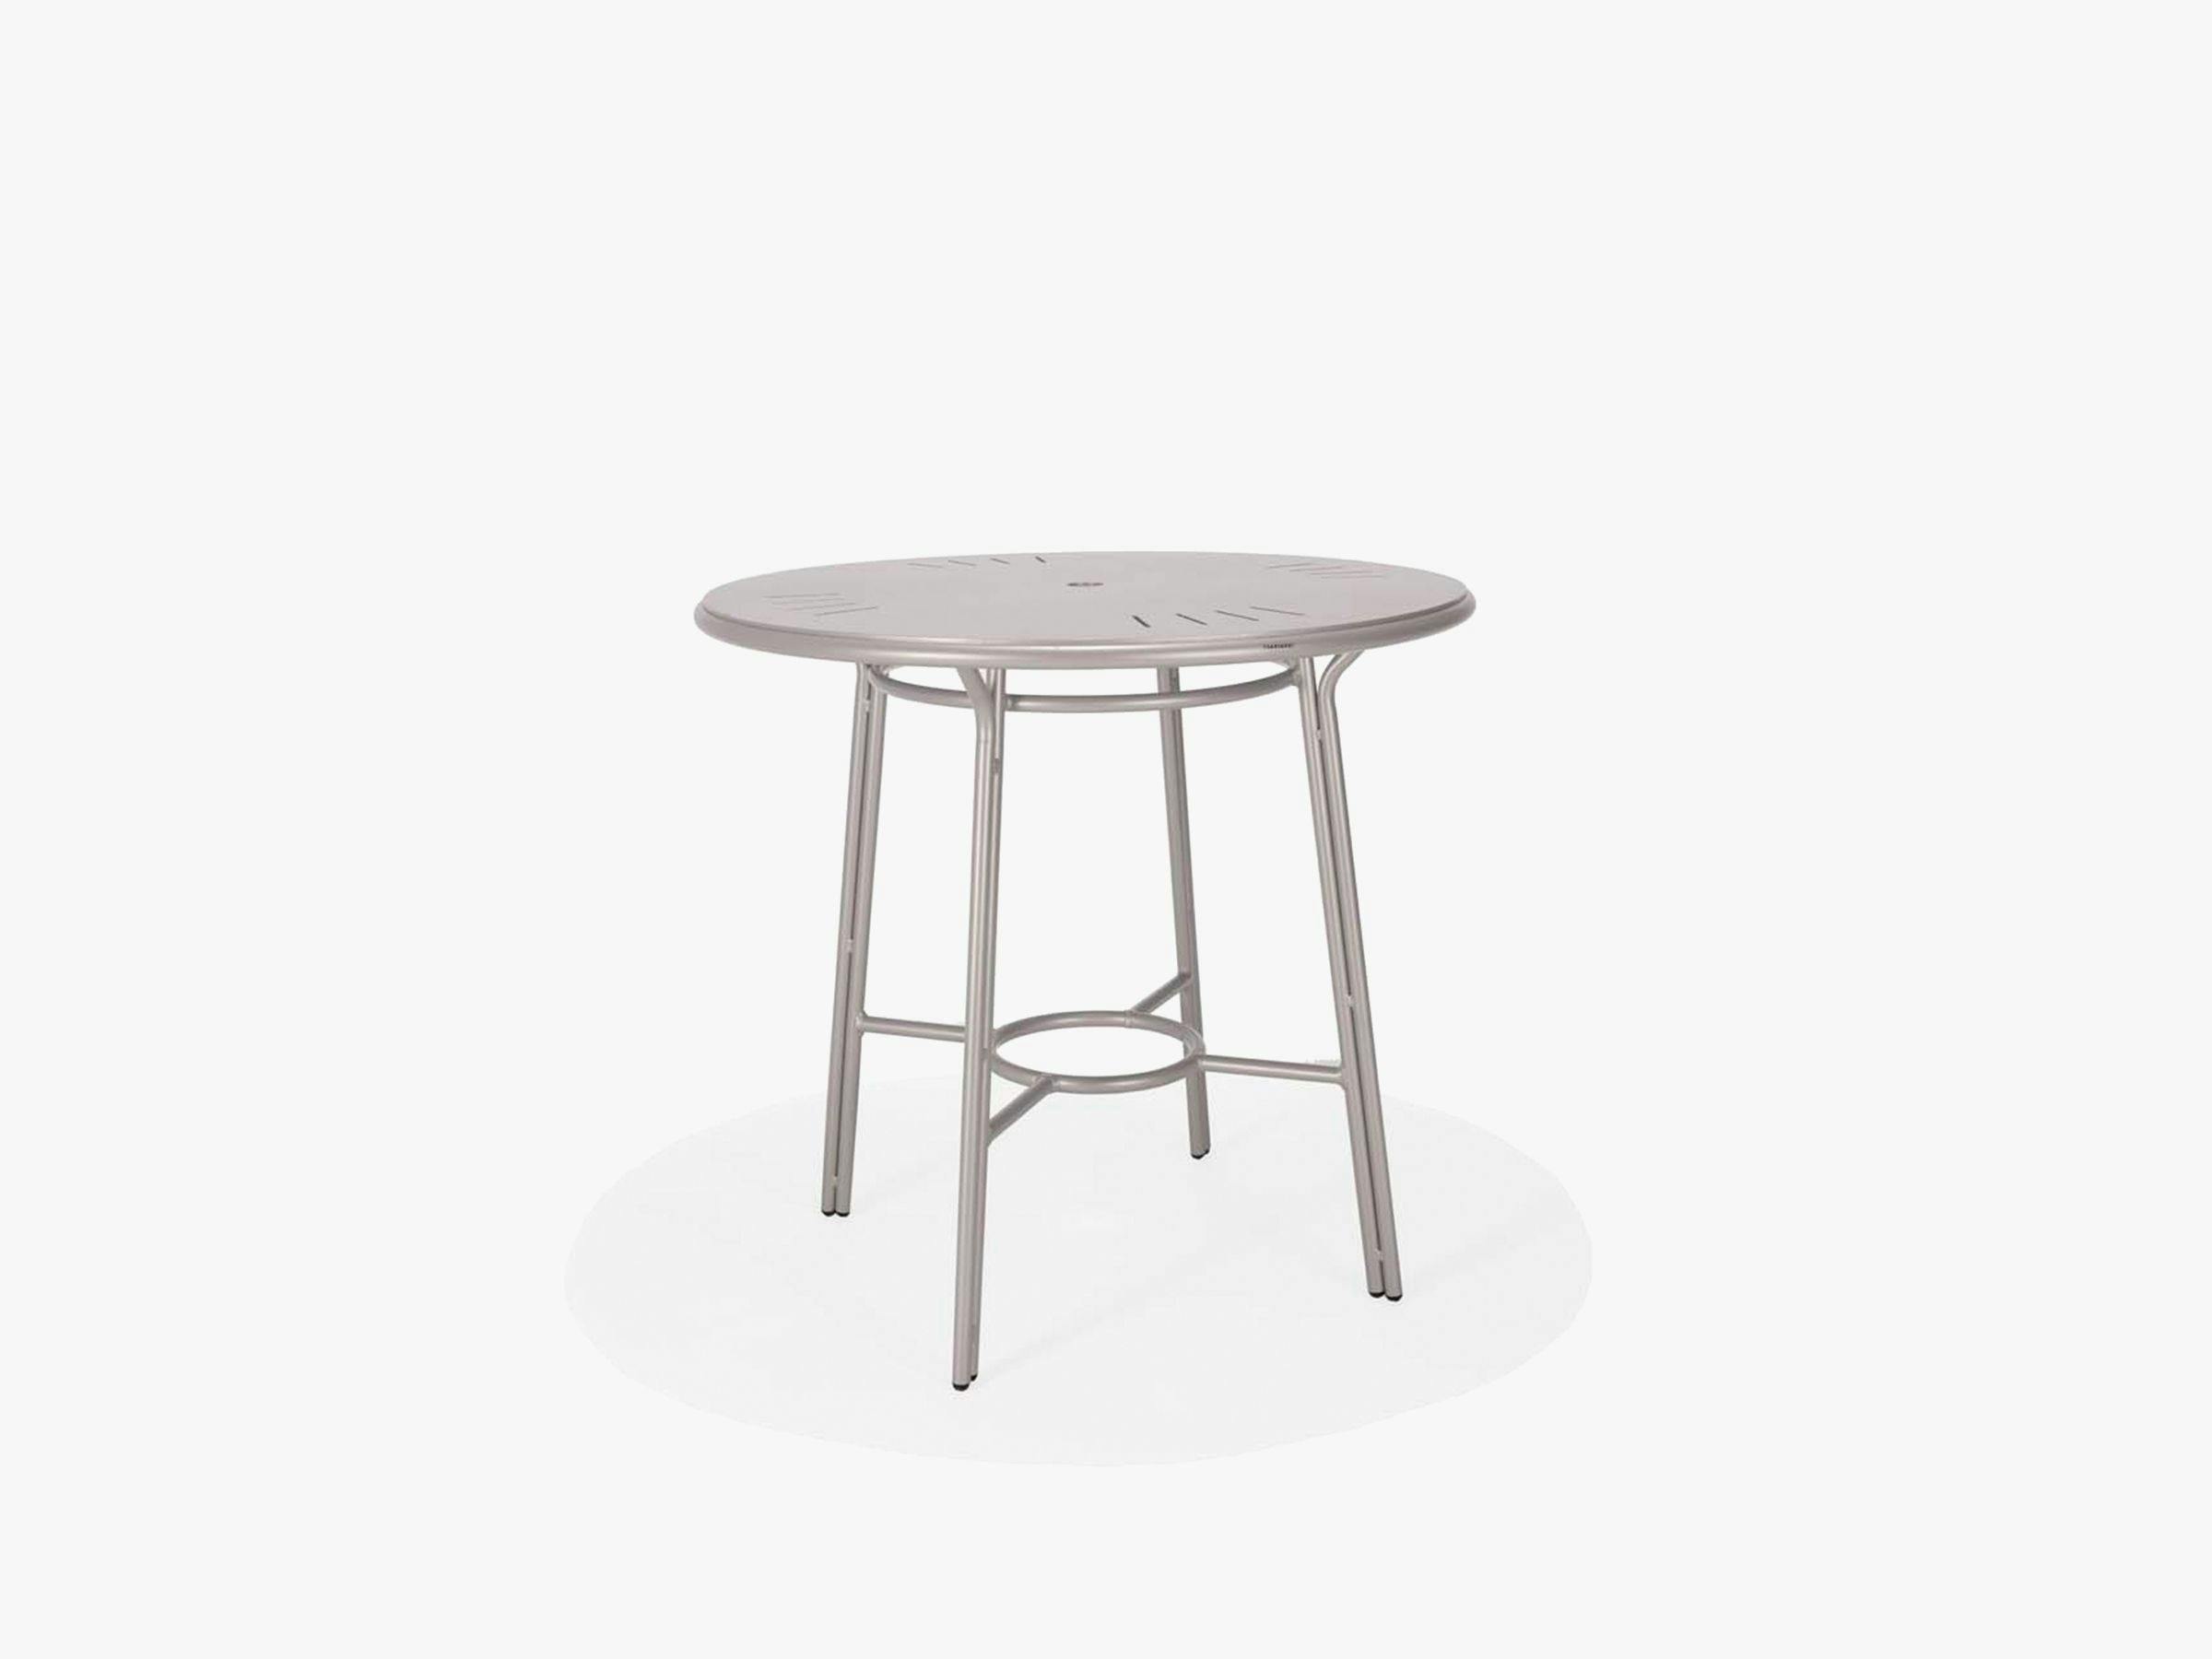 Surf Suncloth Weave 42" Round Bar Height Table with stamped aluminum top